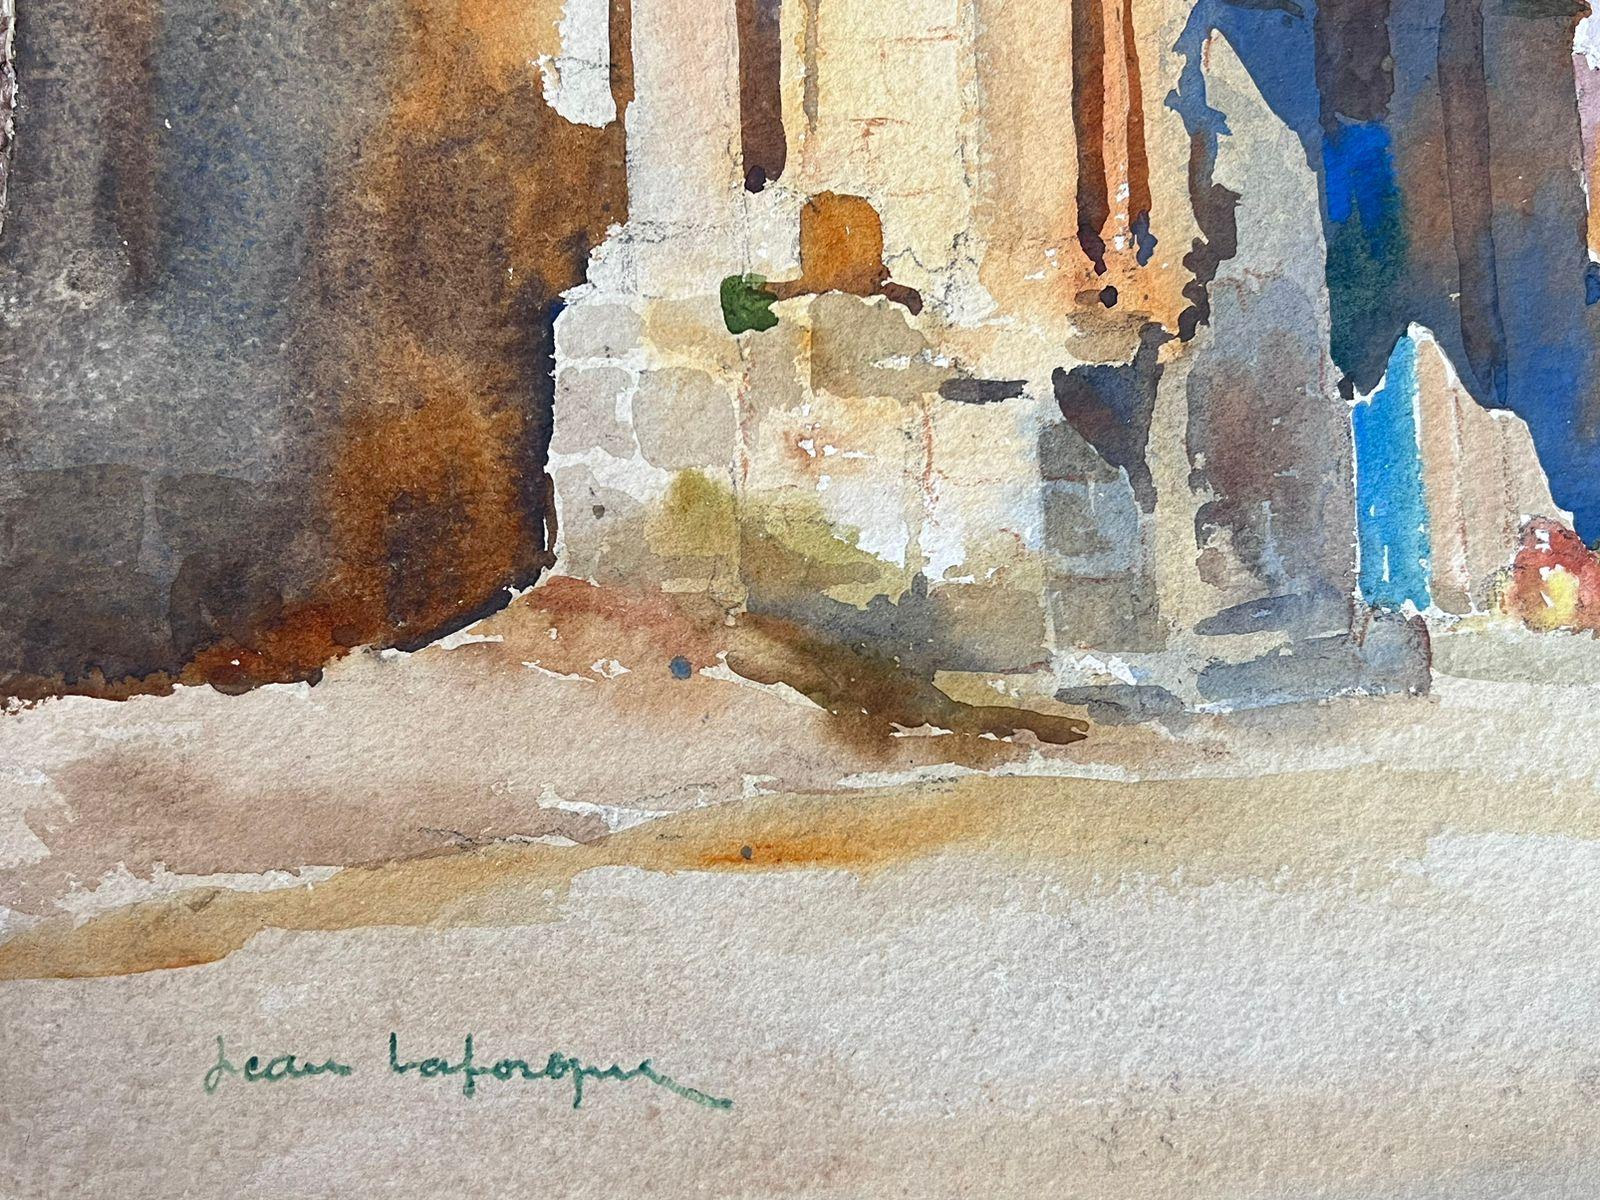 Jean La Forgue (French 1901-1975) signed watercolour on card, unframed
painting: 18 x 22 inches
provenance: the artists estate, France
condition: very good and sound condition; there are minor age related marks and stains to the surface simply